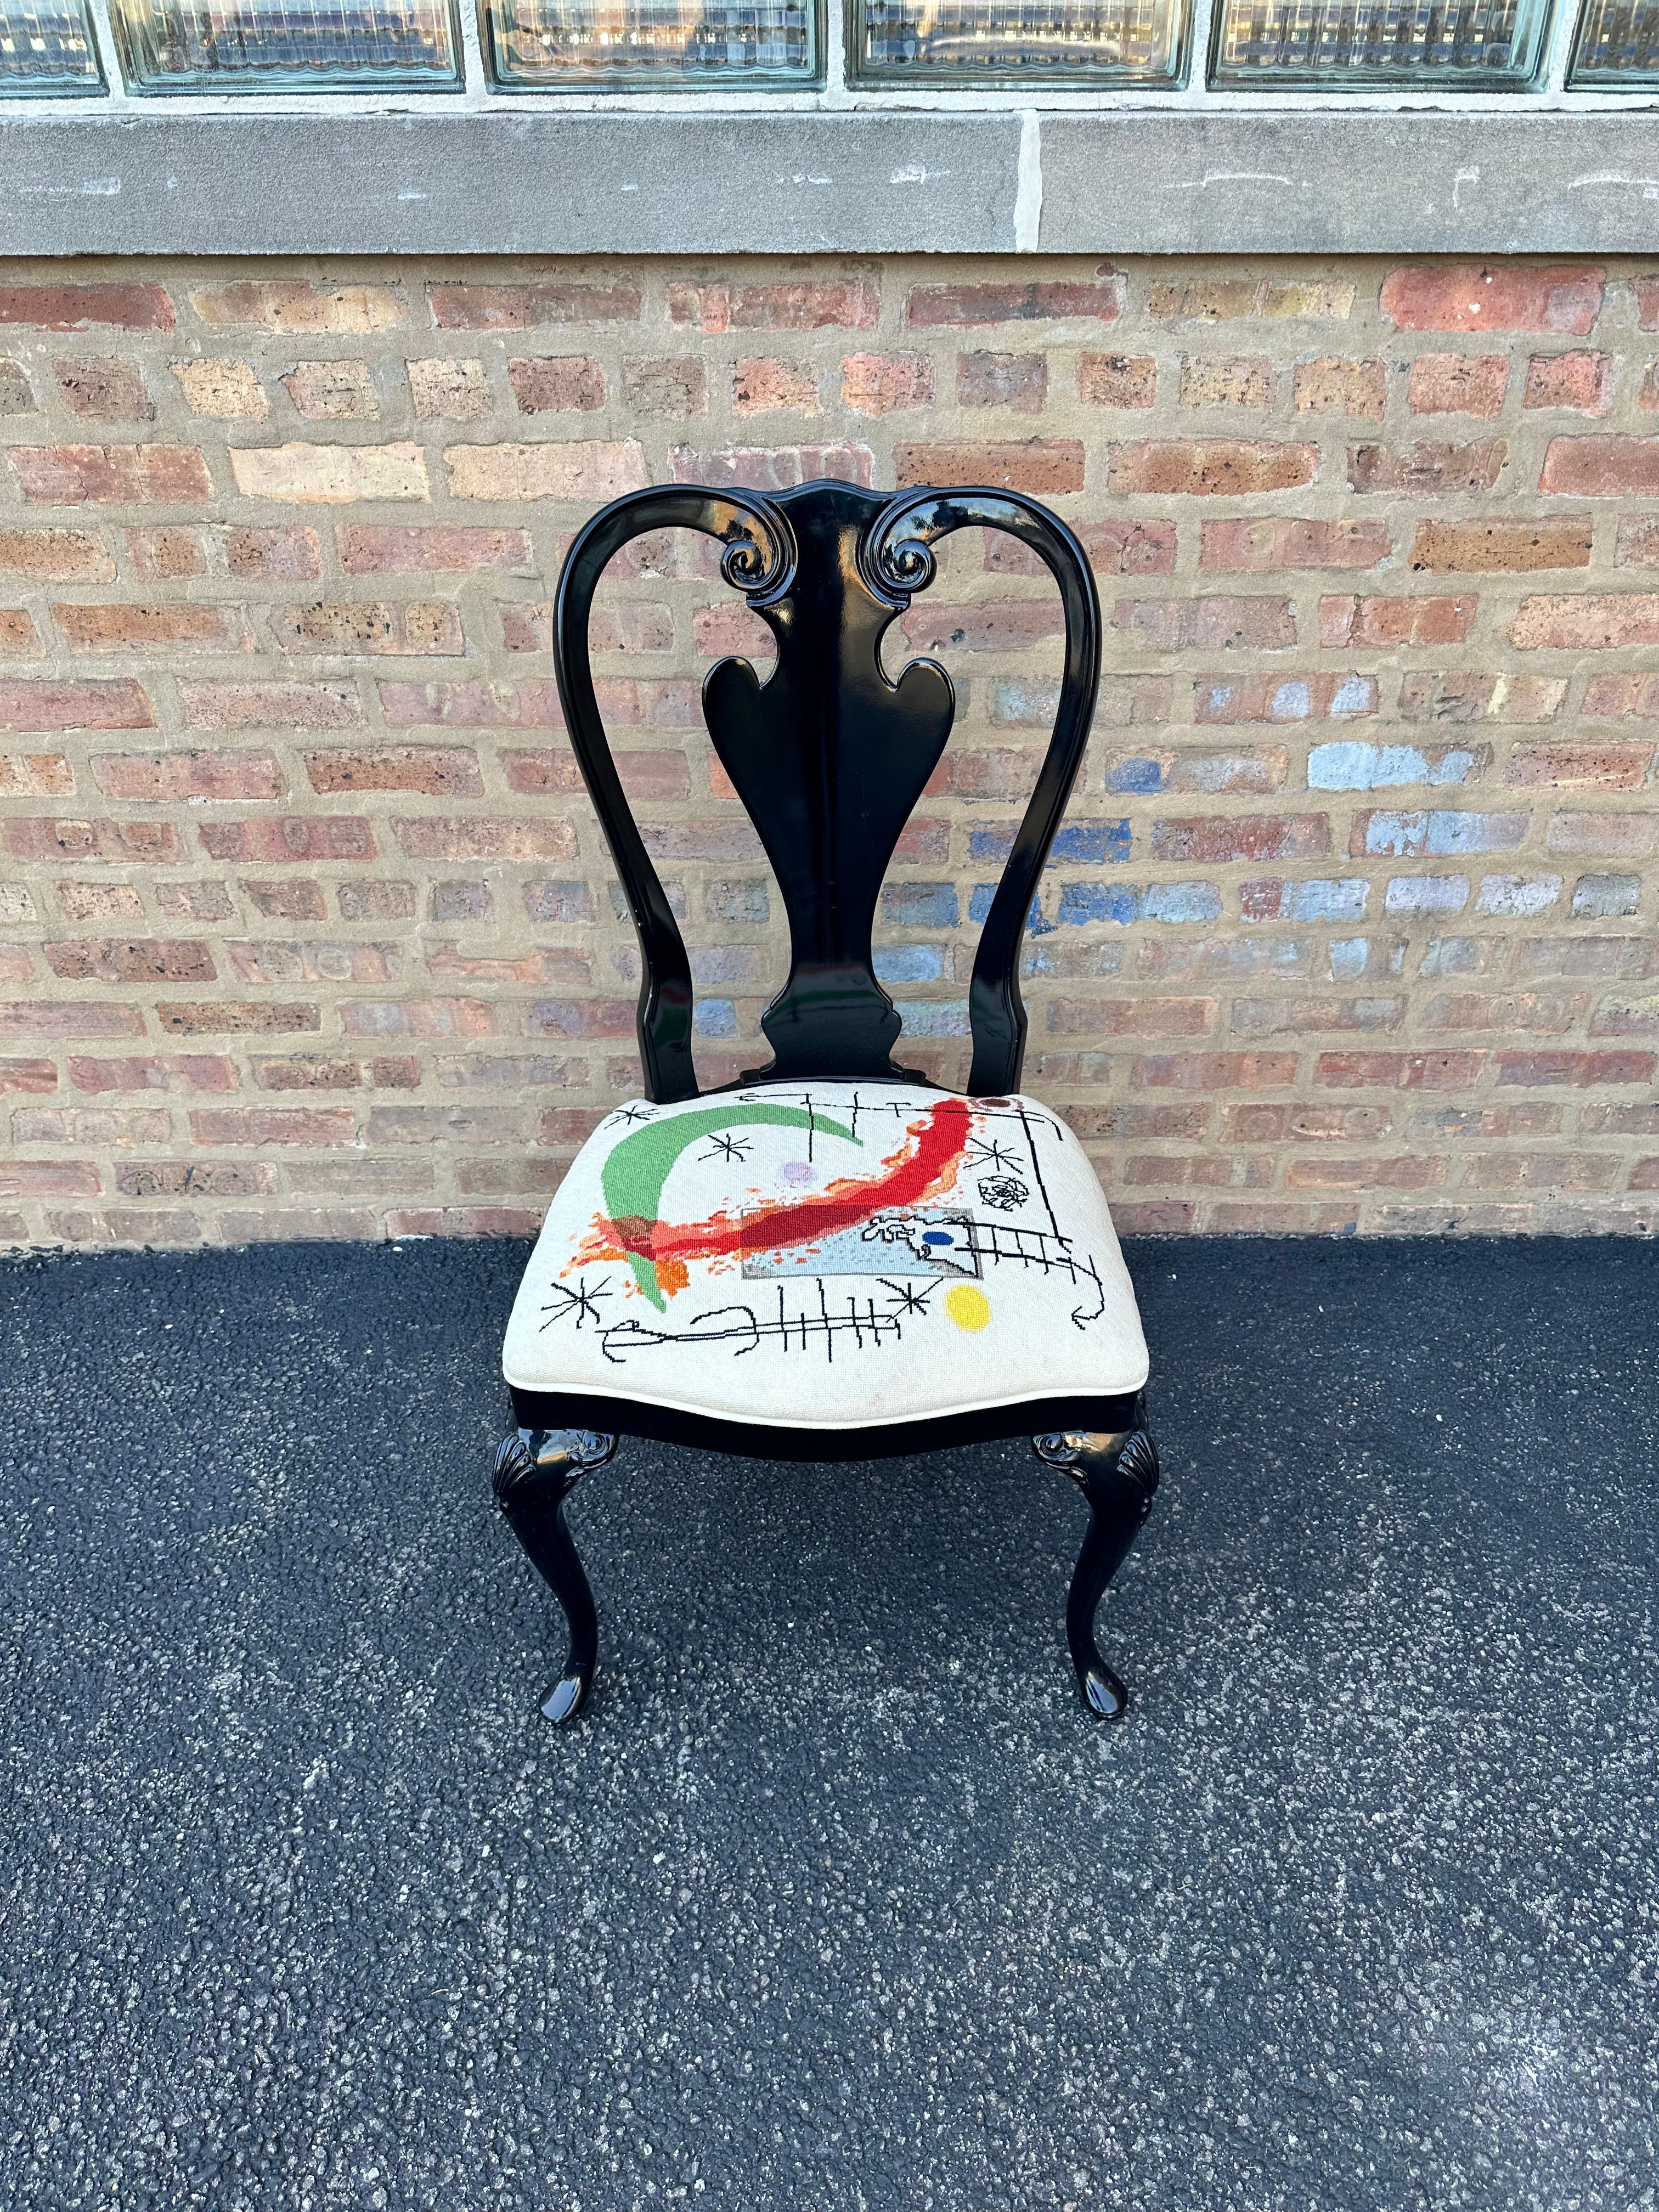 Black Lacquered Queen Anne Dining Chairs with Custom Miró Needlepoint Seats

A set of 8 black lacquered Queen Anne style dining chairs with custom-made needlepoint seats featuring the art of Spanish artist Joan Miró (1893-1983). Chairs have a smooth